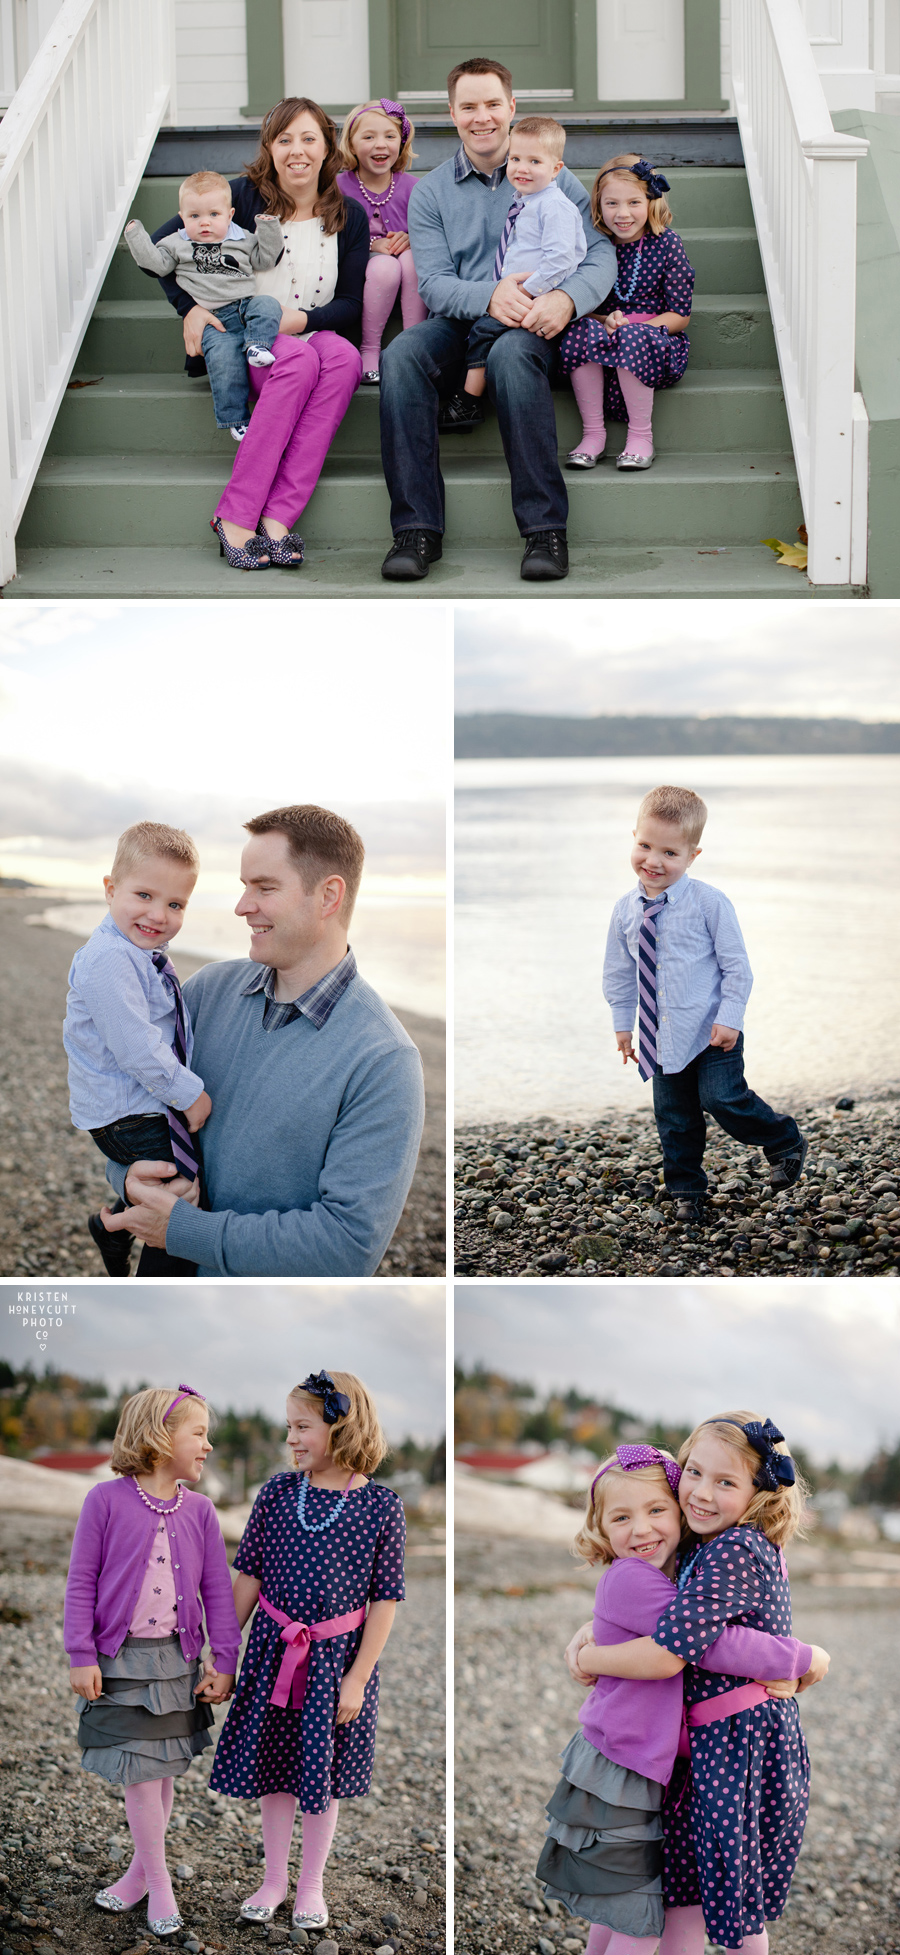 Sunset Family Session at lighthouse beach by Kristen Honeycutt Photo Co.